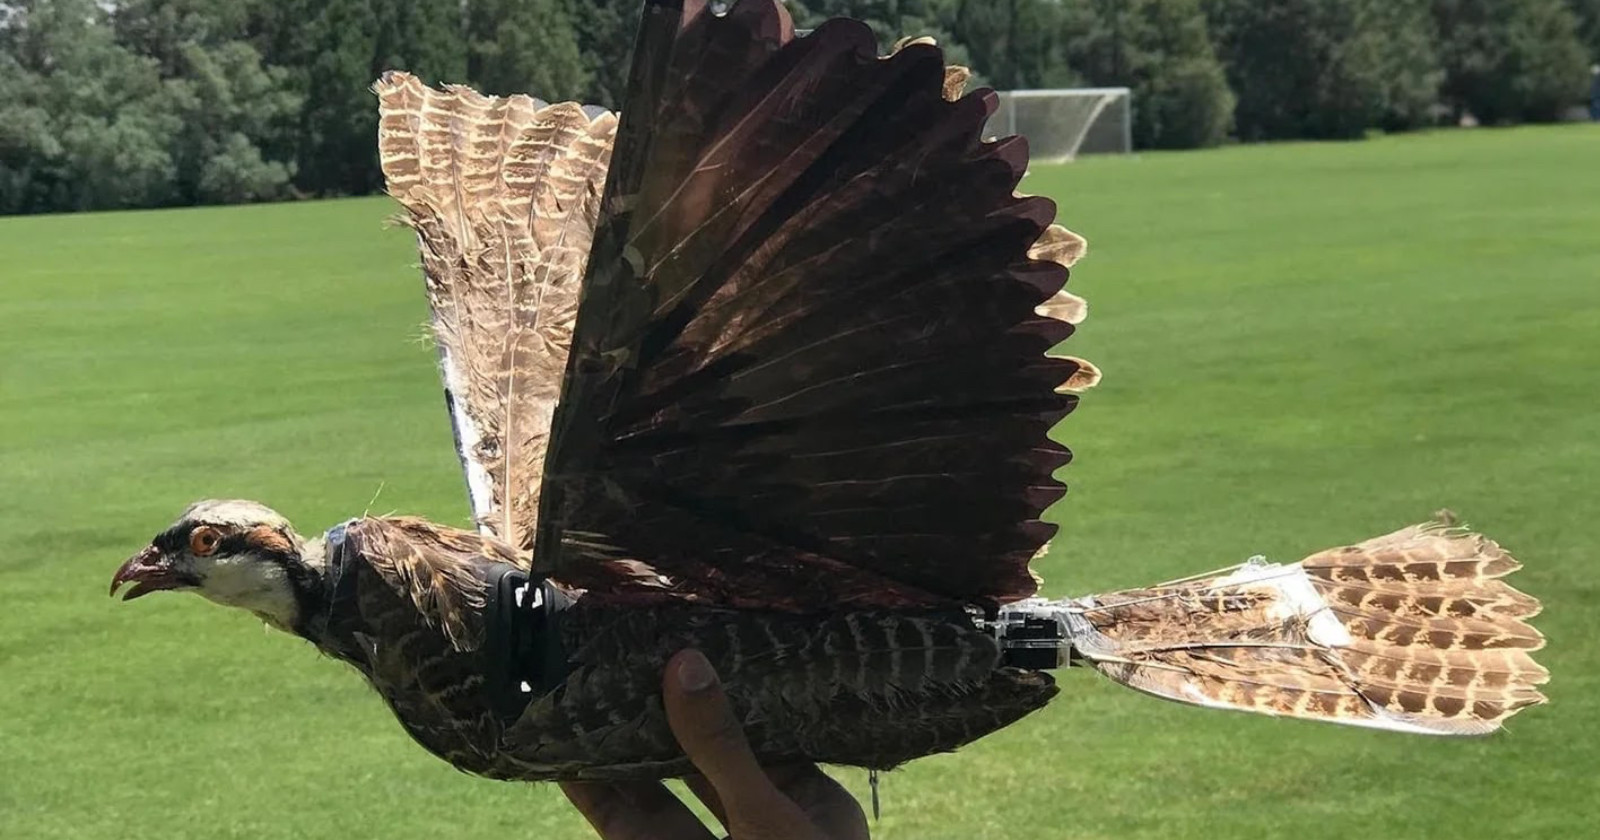  researchers turn dead birds into drones could 